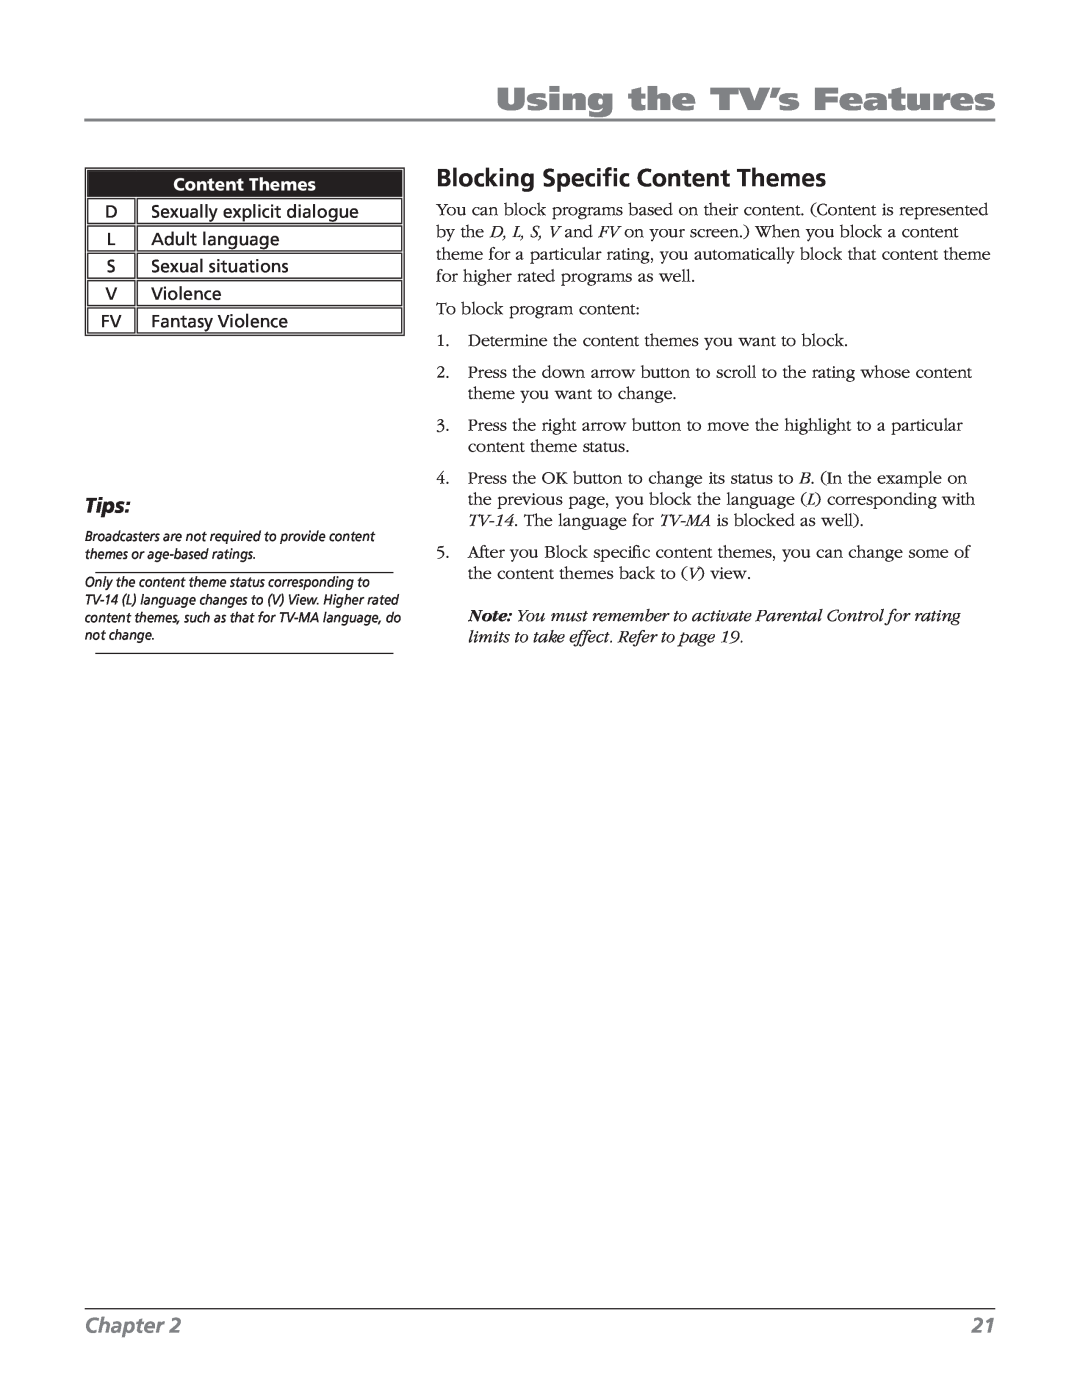 RCA 32v434t, 32V524T manual Blocking Speciﬁc Content Themes, Using the TV’s Features, Tips, Chapter 